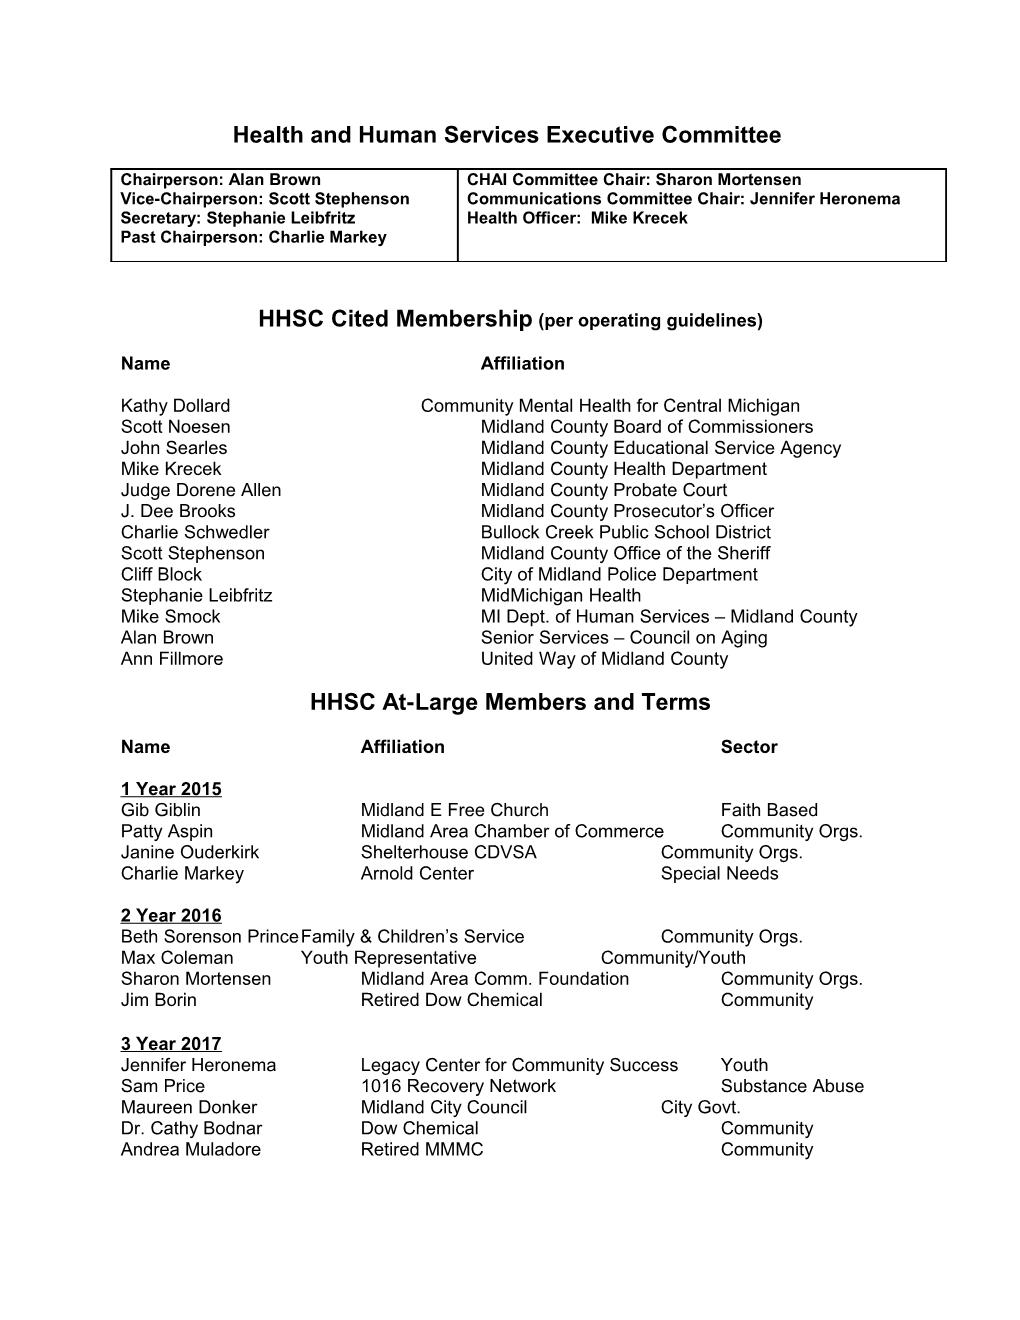 HHSC At-Large Members and Terms